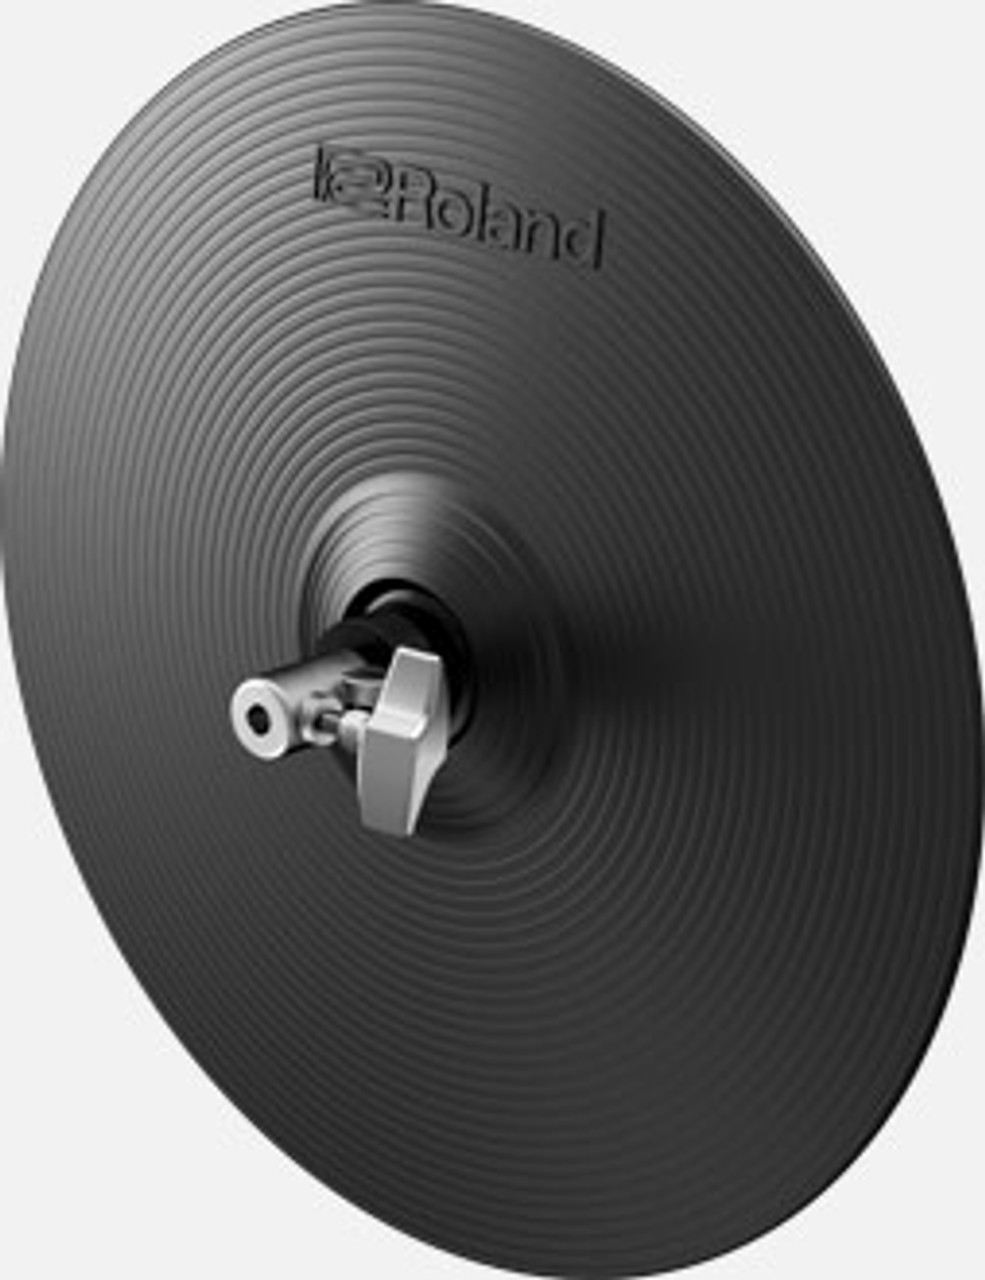 Ideal for Perfecting Hi-Hat Techniques